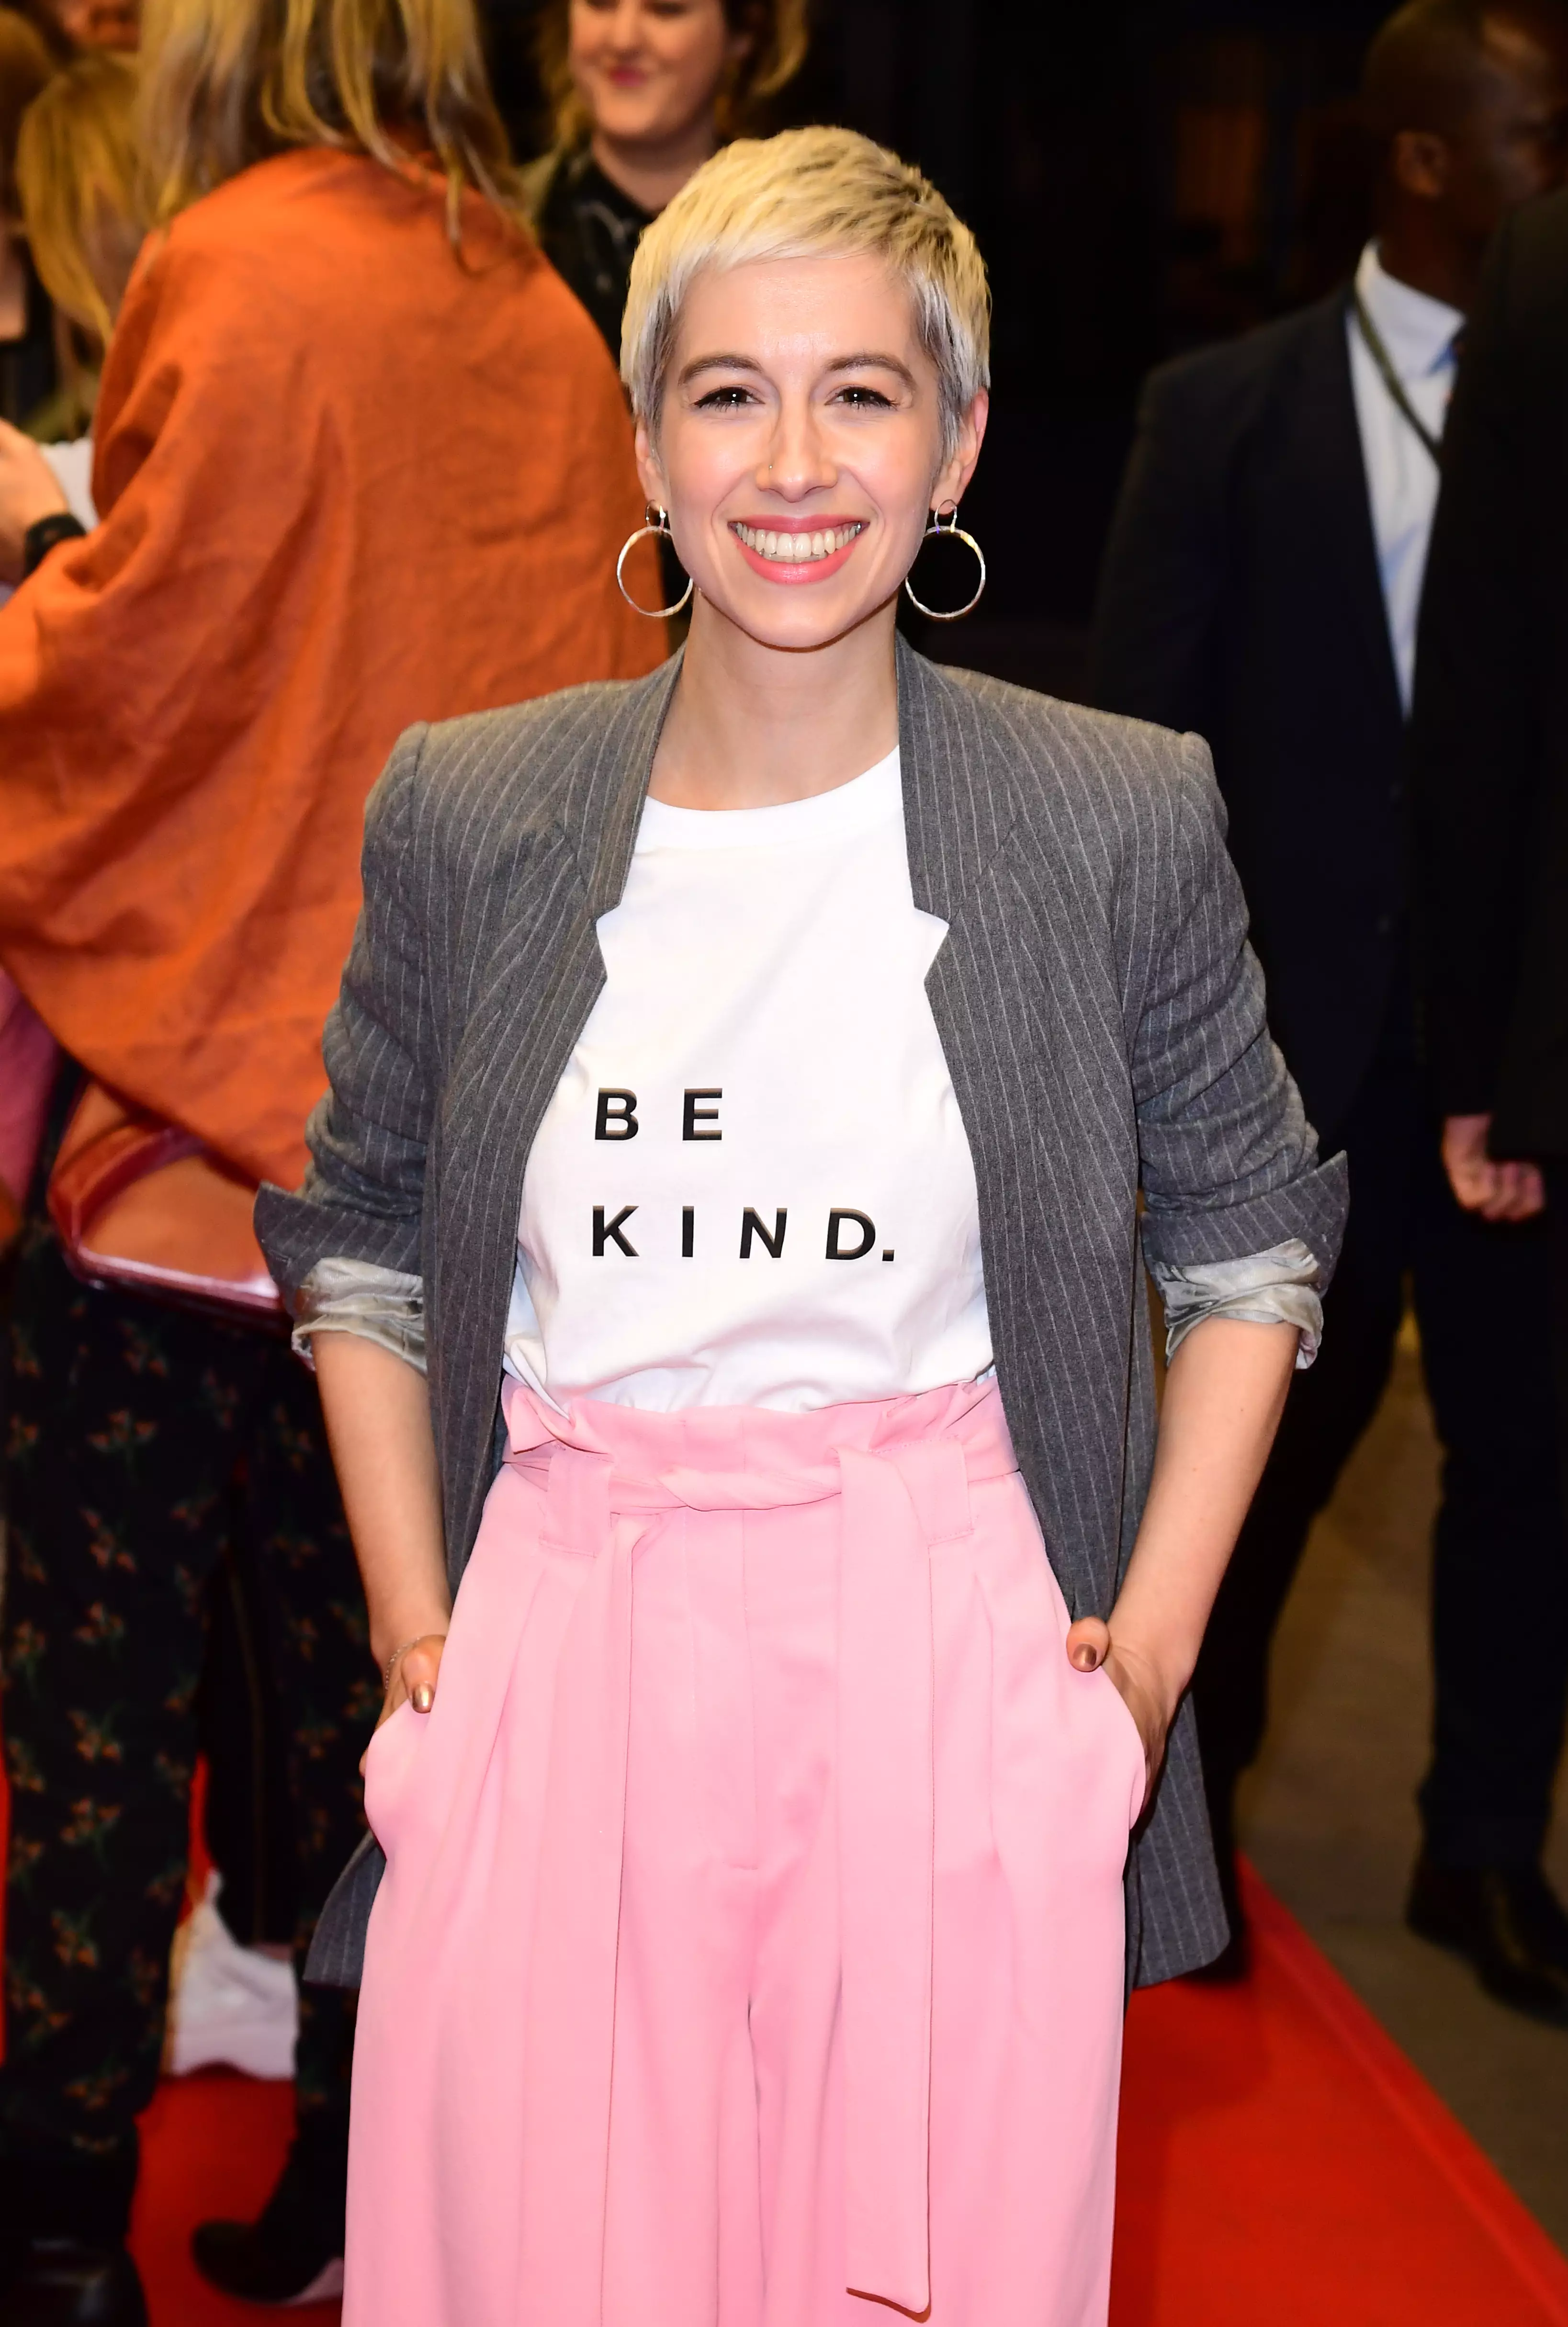 SuRie in 2019.